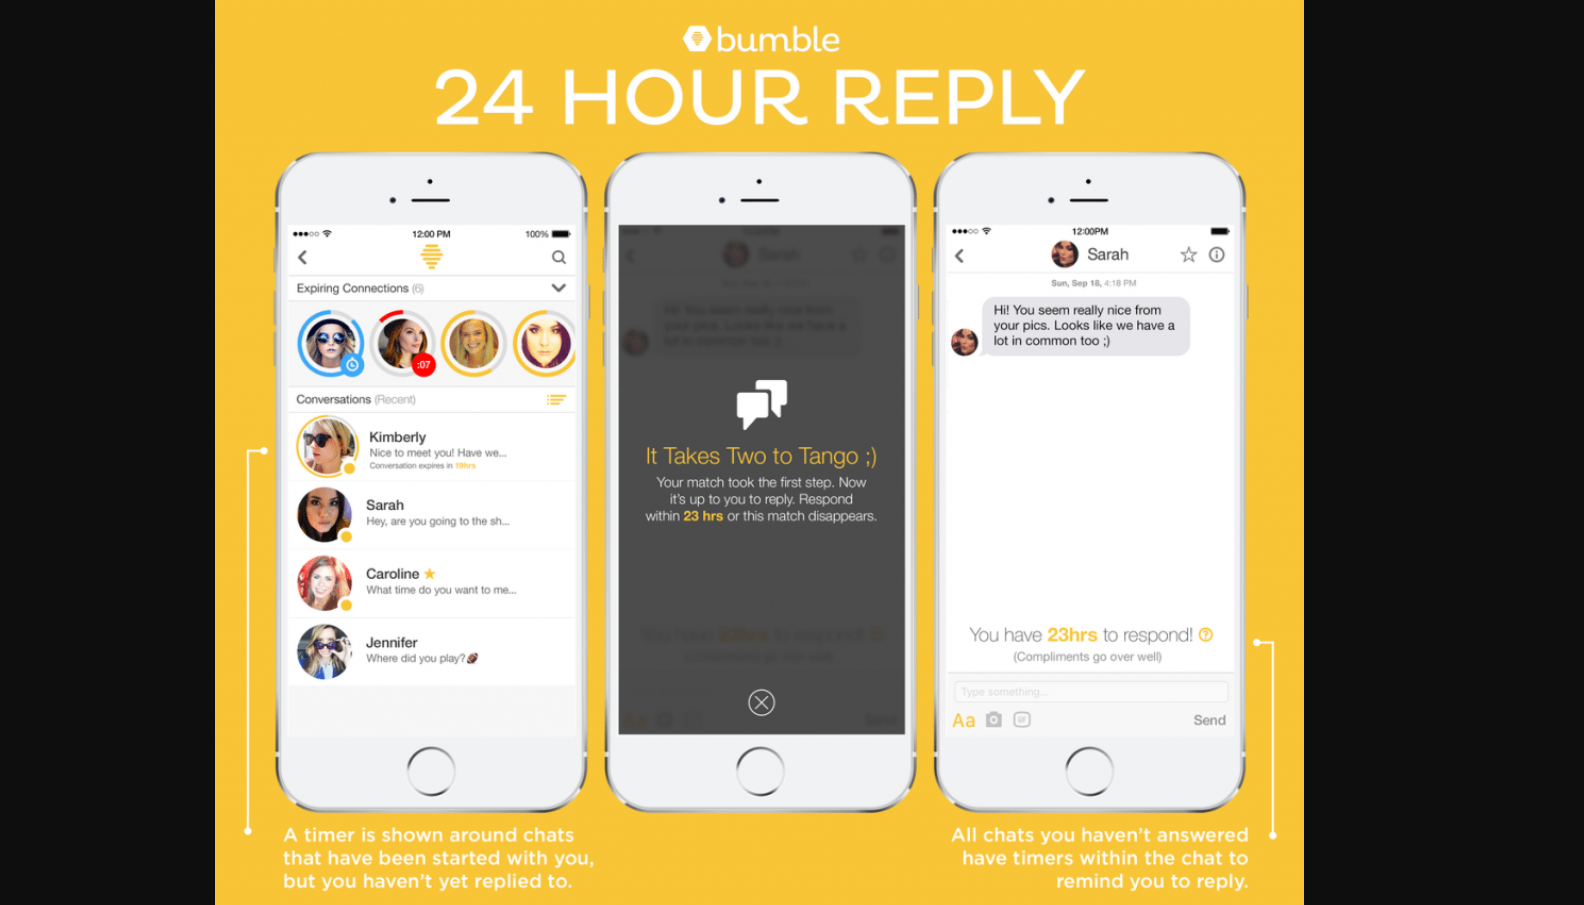 Bumble dating app used a counter to encourage people to act